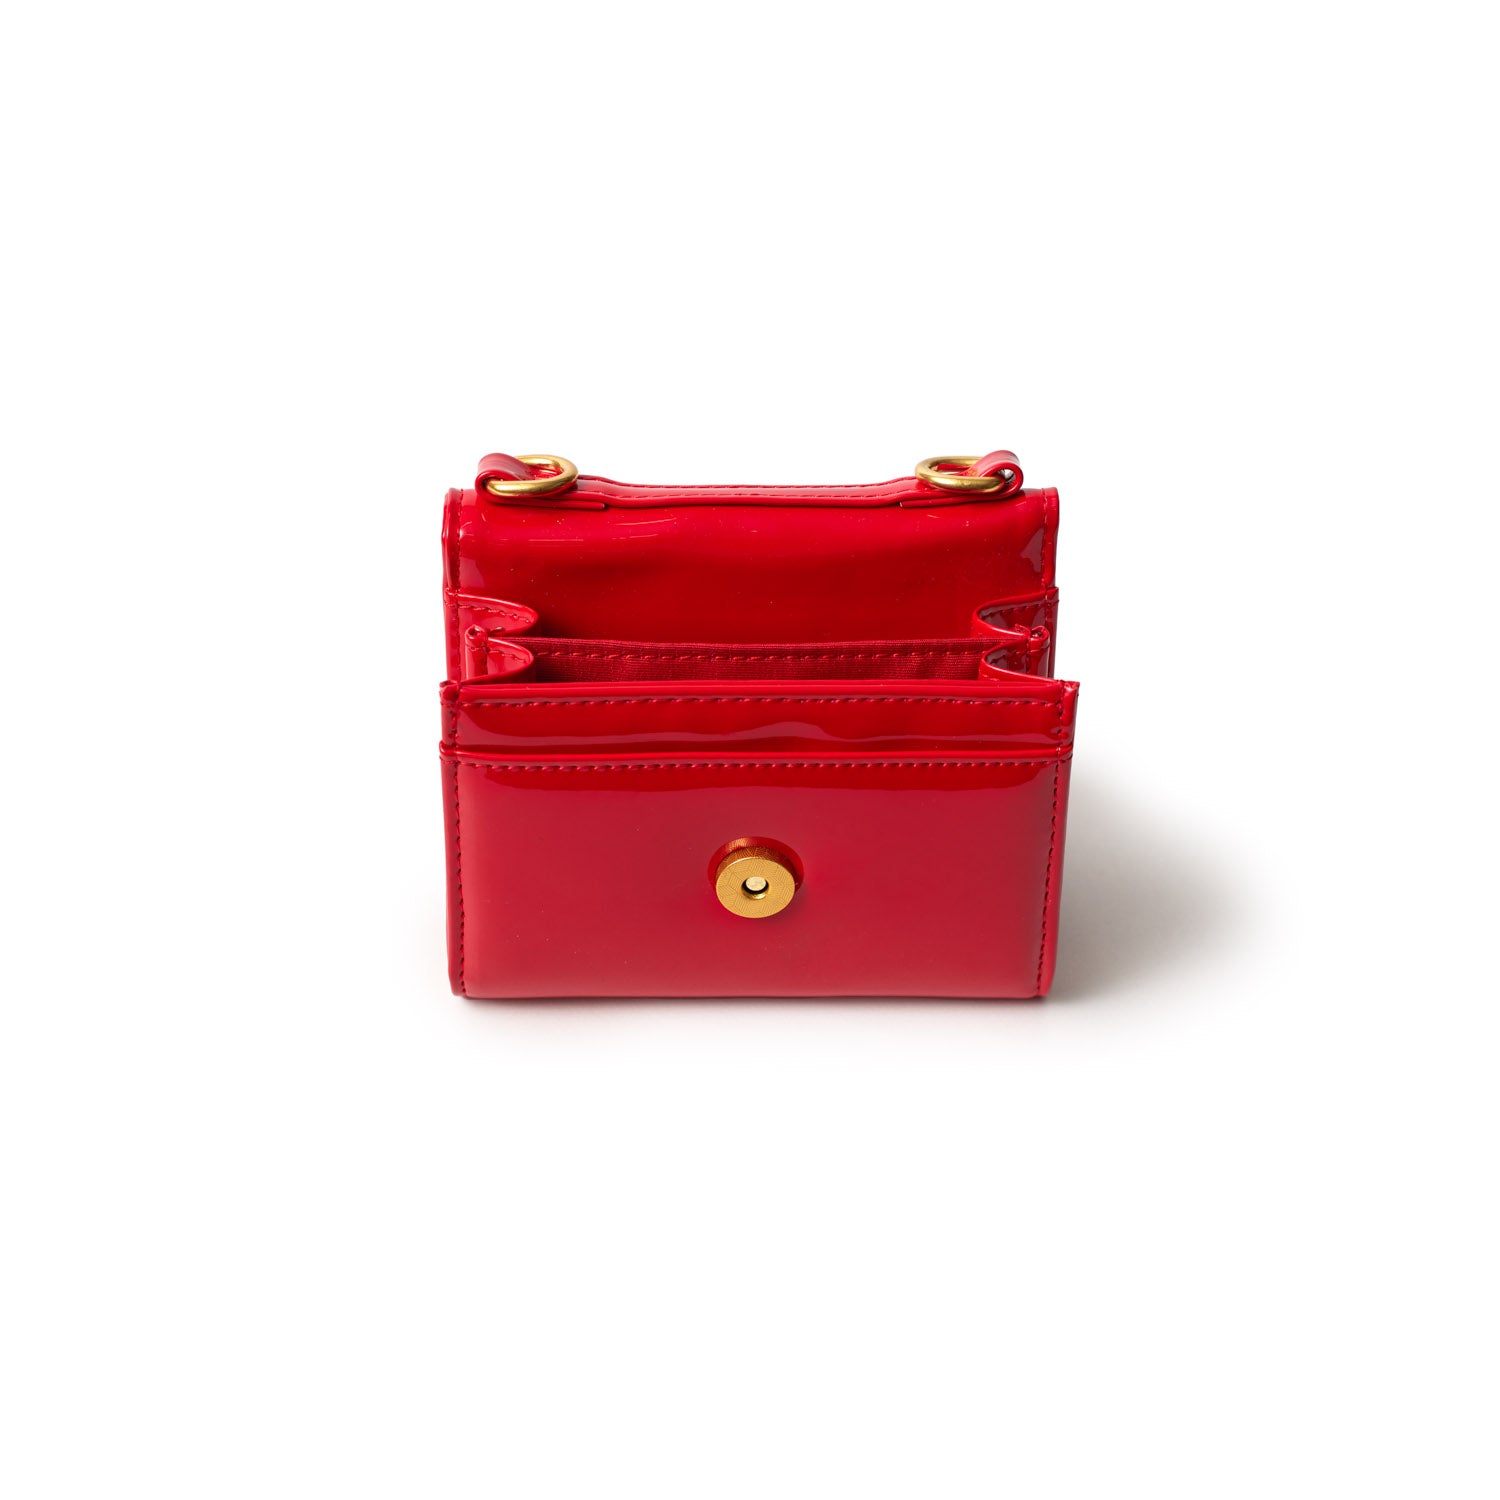 STANDARD MIRROR RED COMPACT WALLET